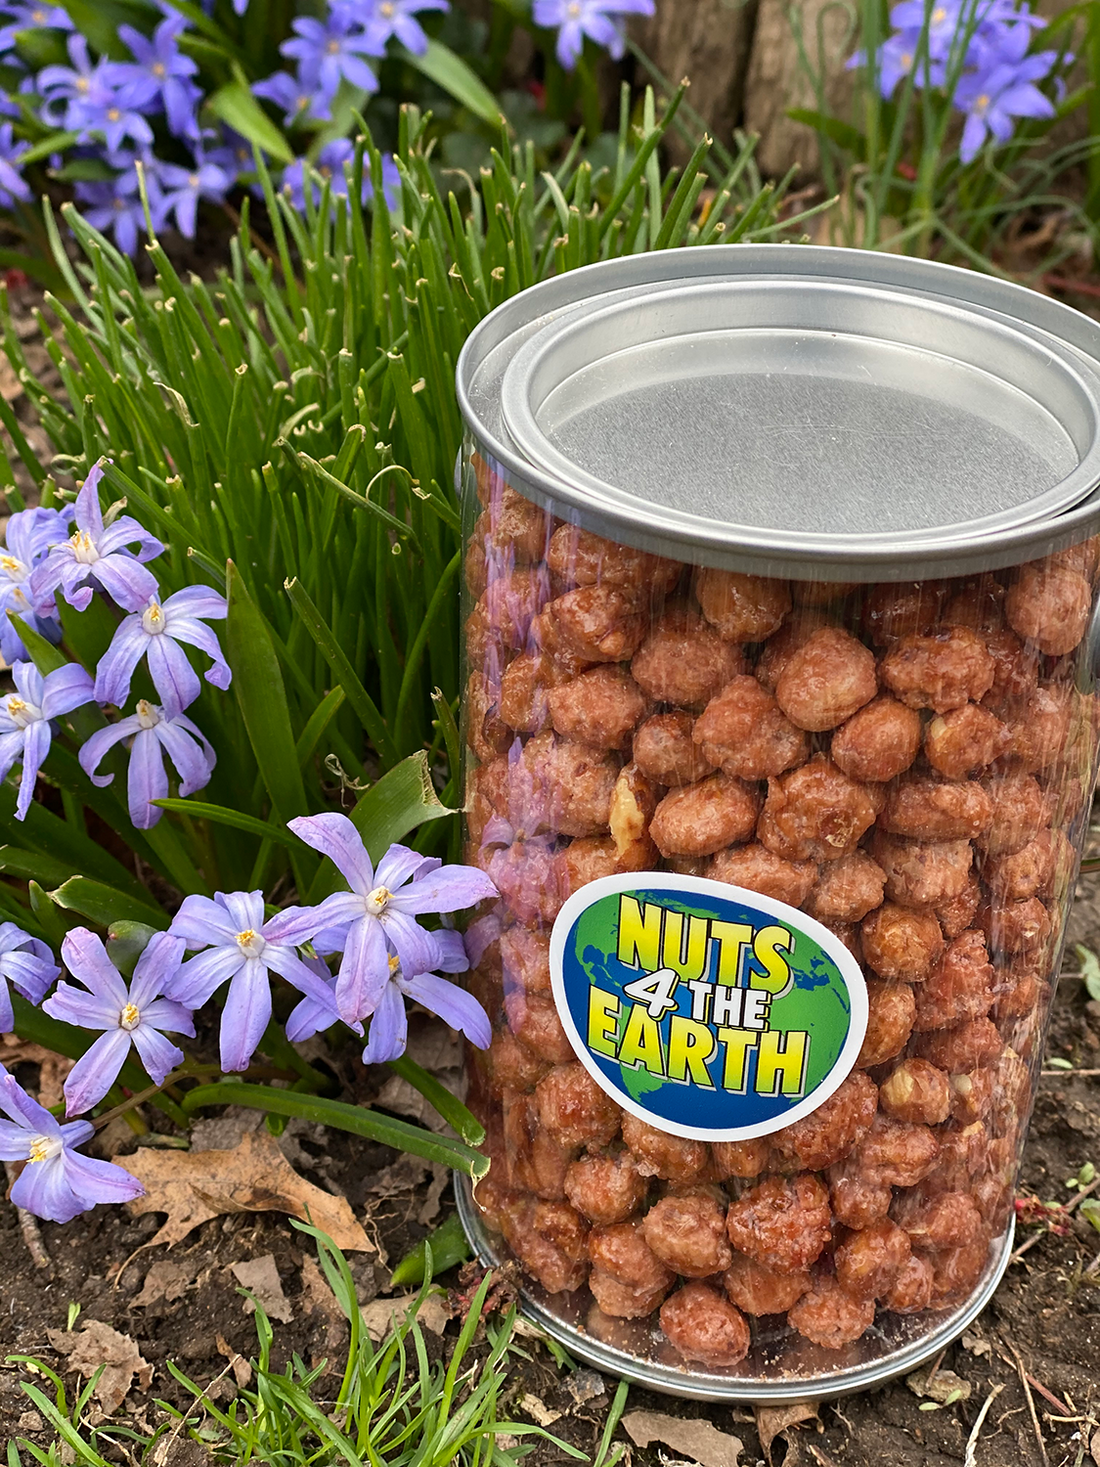 REUSABLE 1 QUART NUTS 4 THE EARTH GIFT TIN IN GIFT BOX